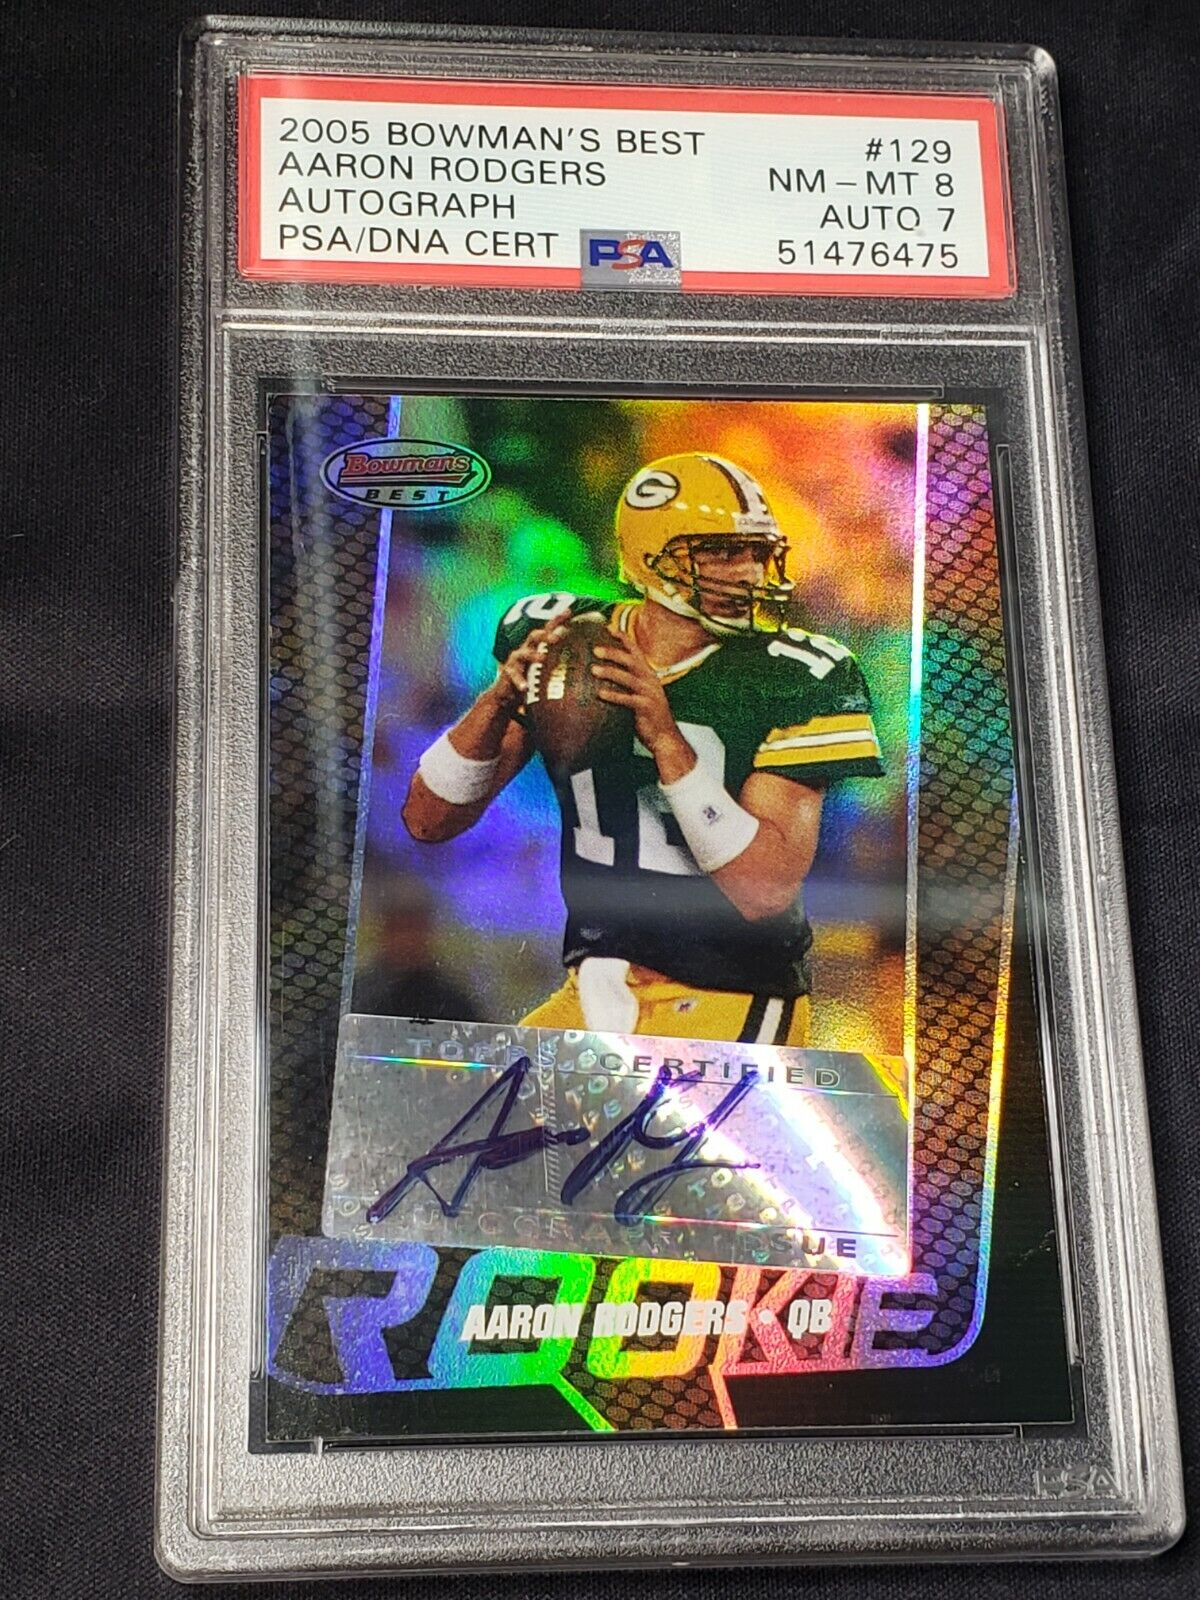 Most valuable Aaron Rodgers rookie cards: 2005 Bowman's best autograph